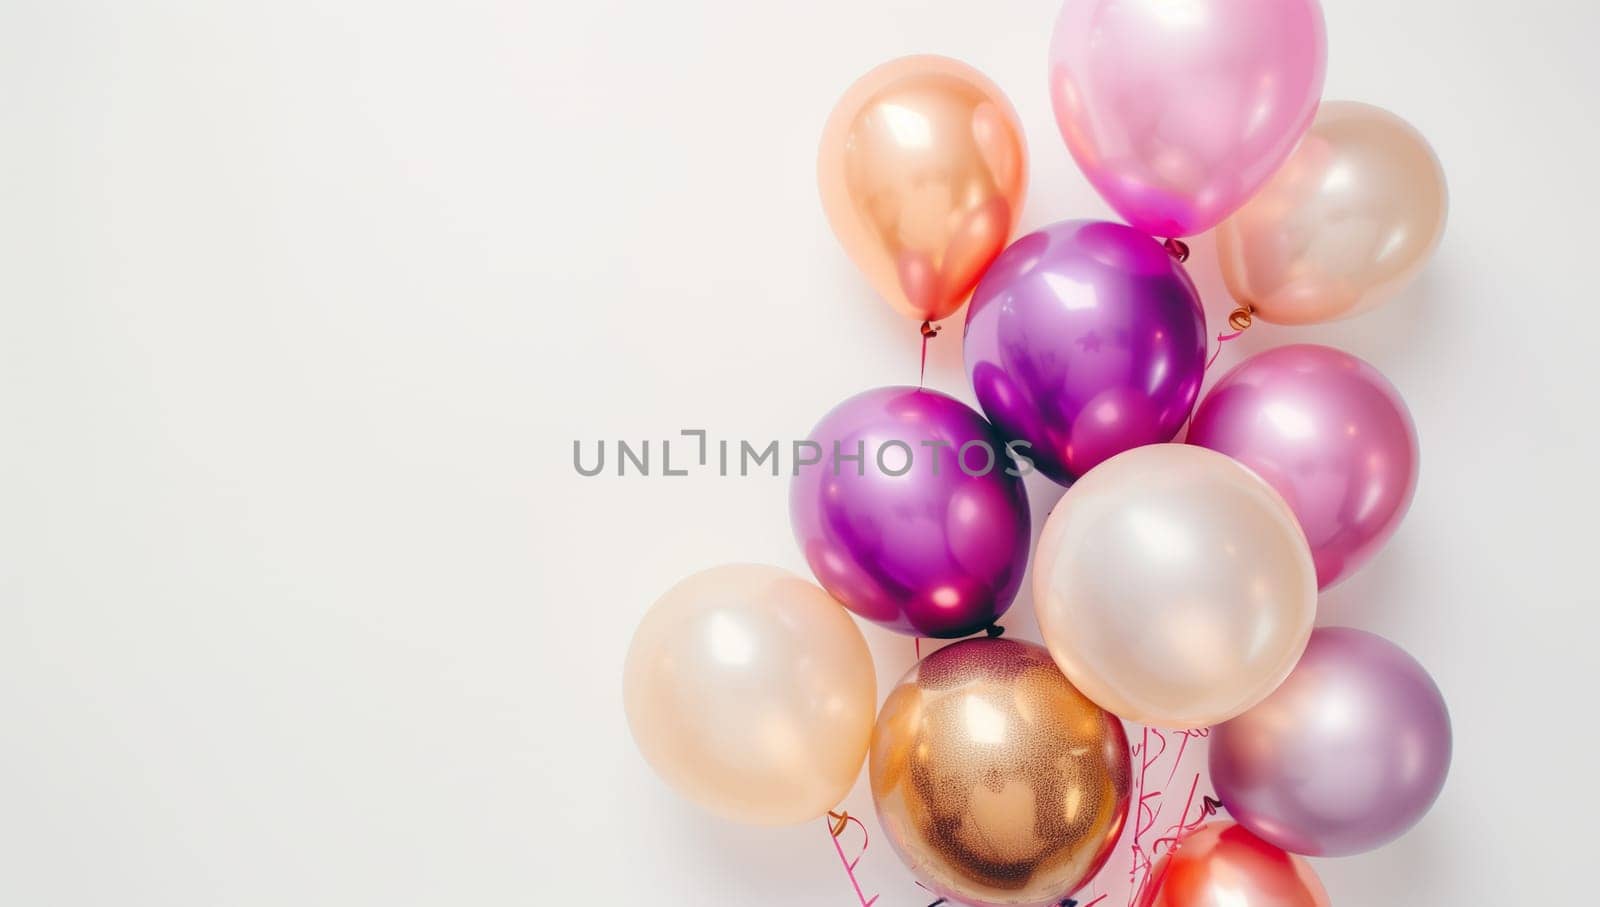 a bunch of colorful balloons on a white background by richwolf